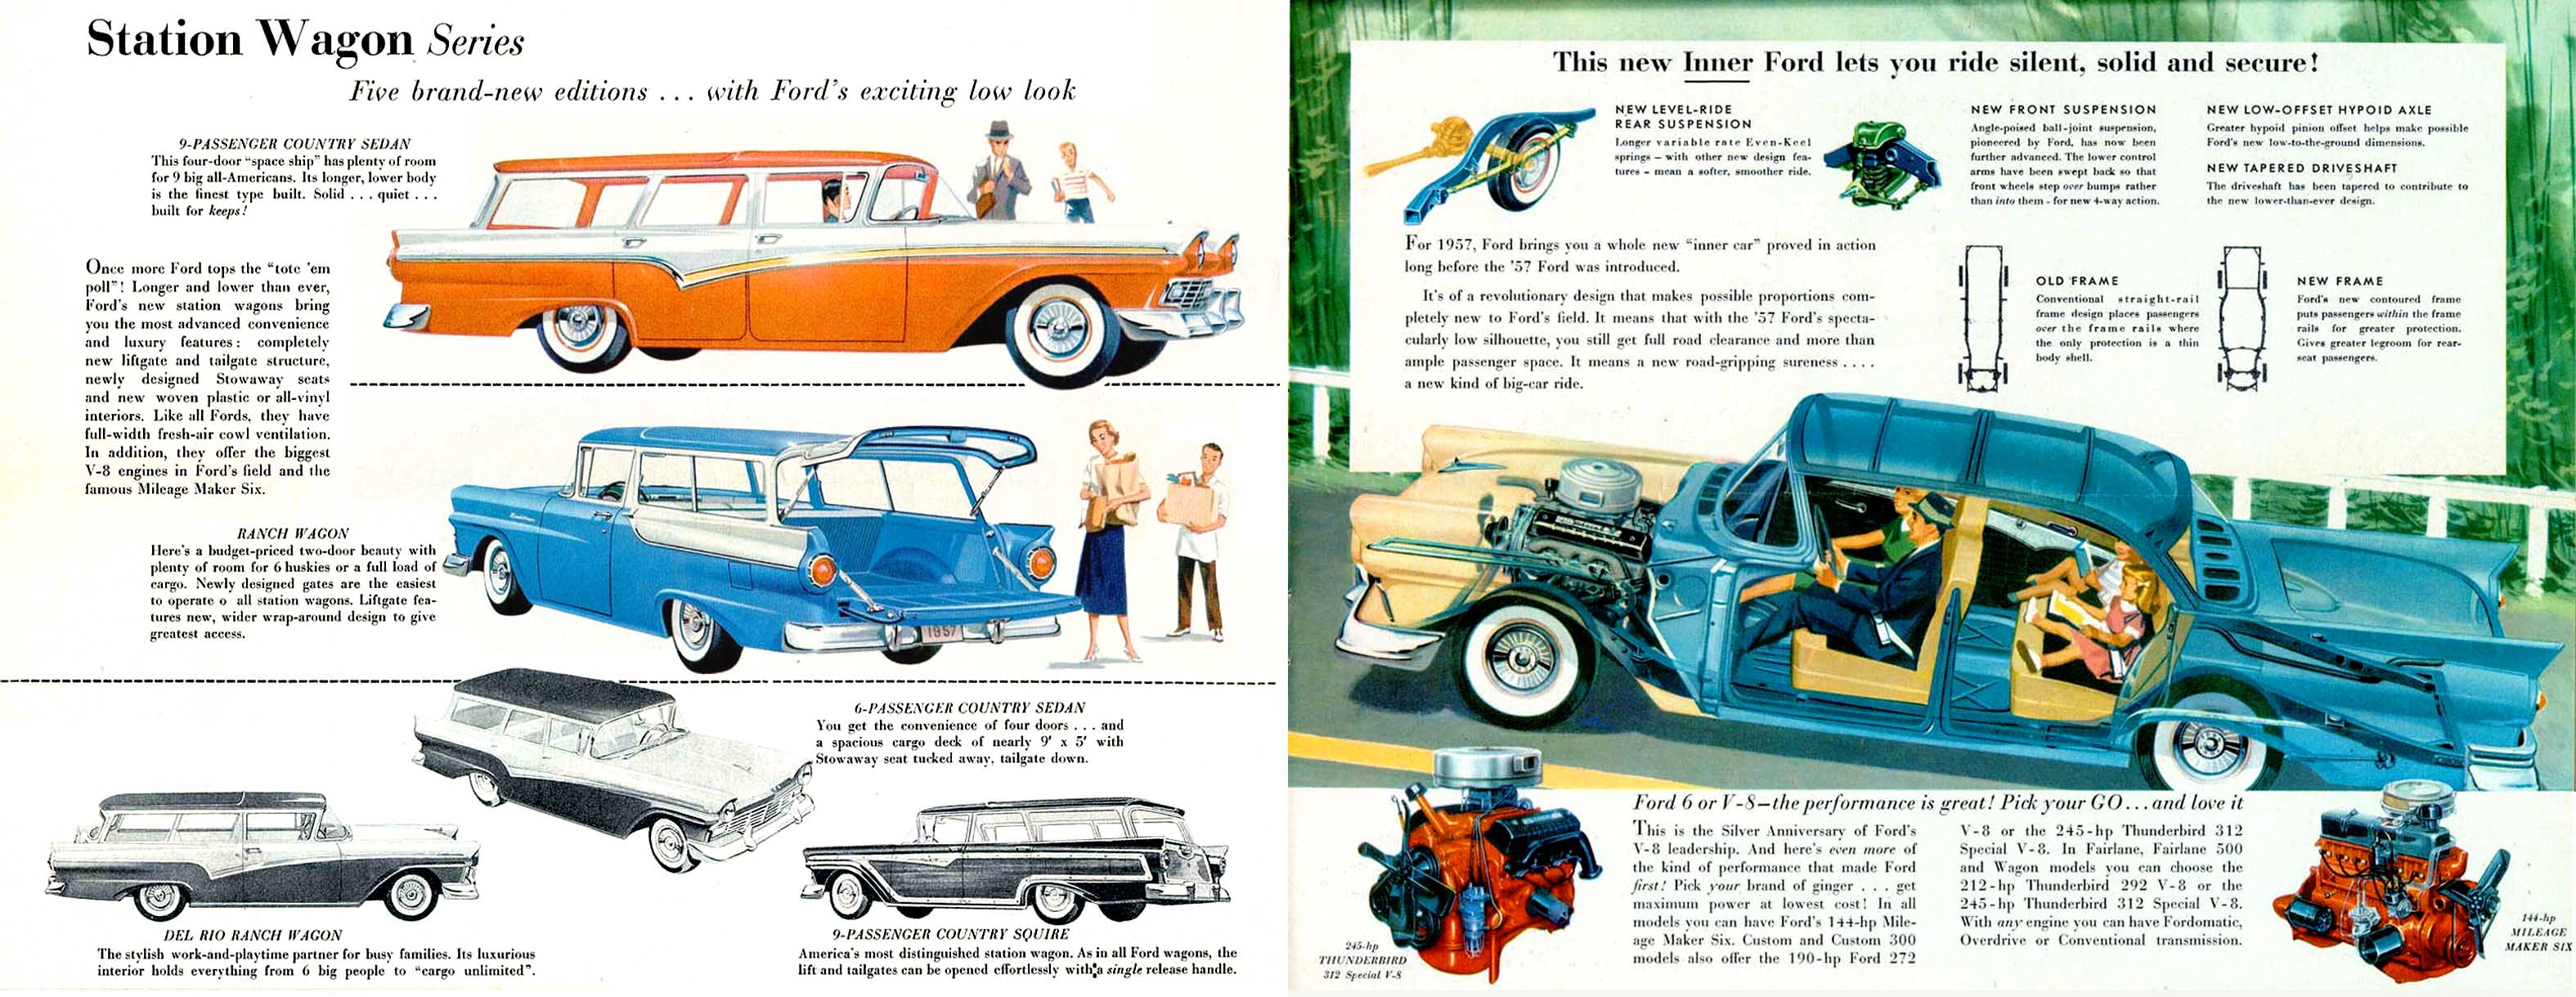 1957_Ford_Foldout-06-07